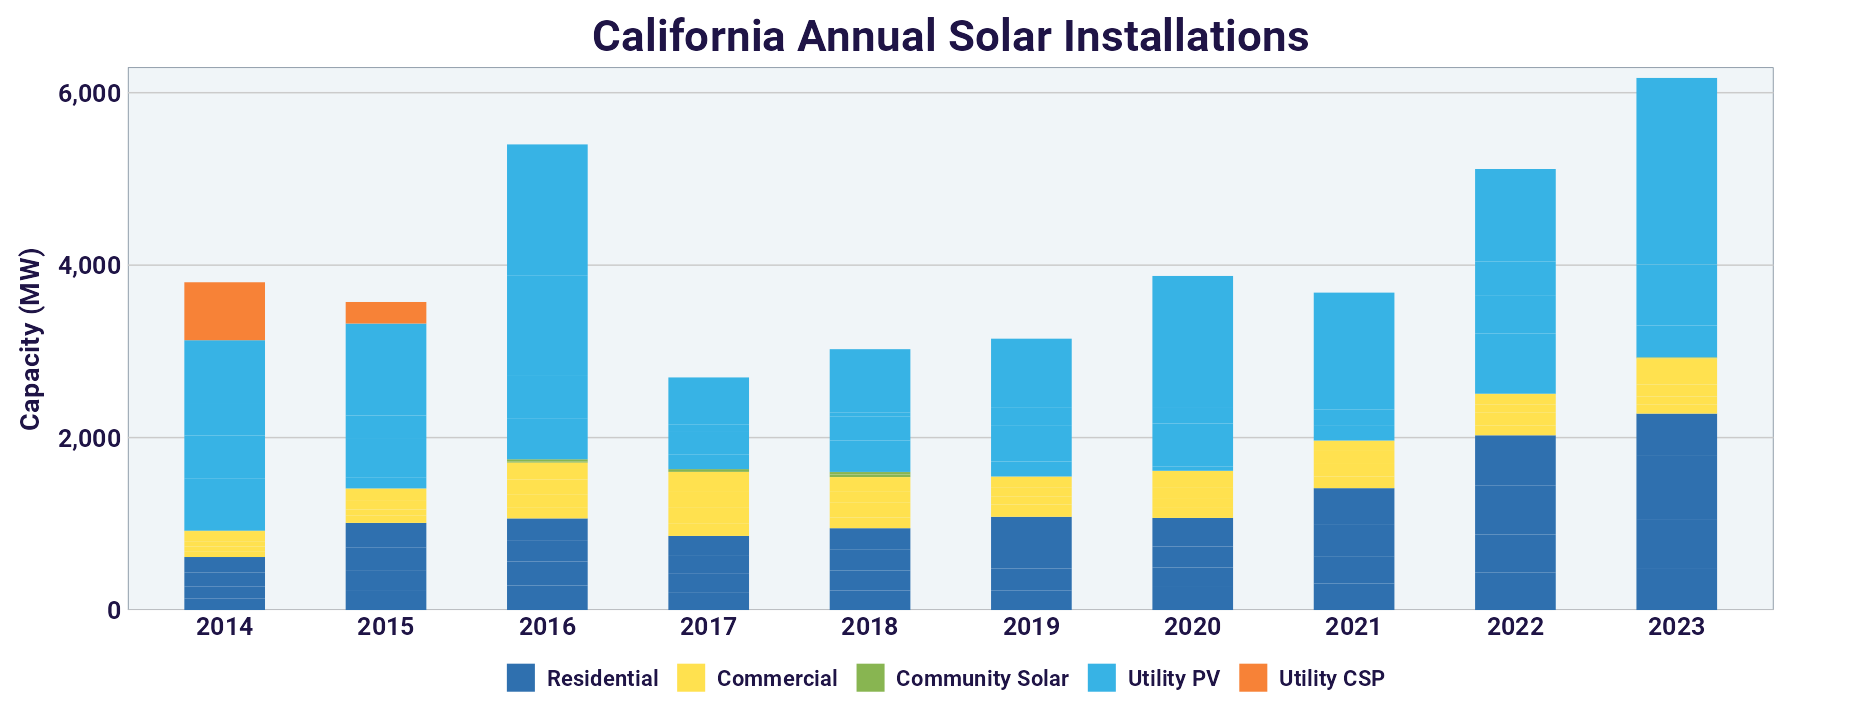 Annual Solar Installations in California Provided by SEIA.org